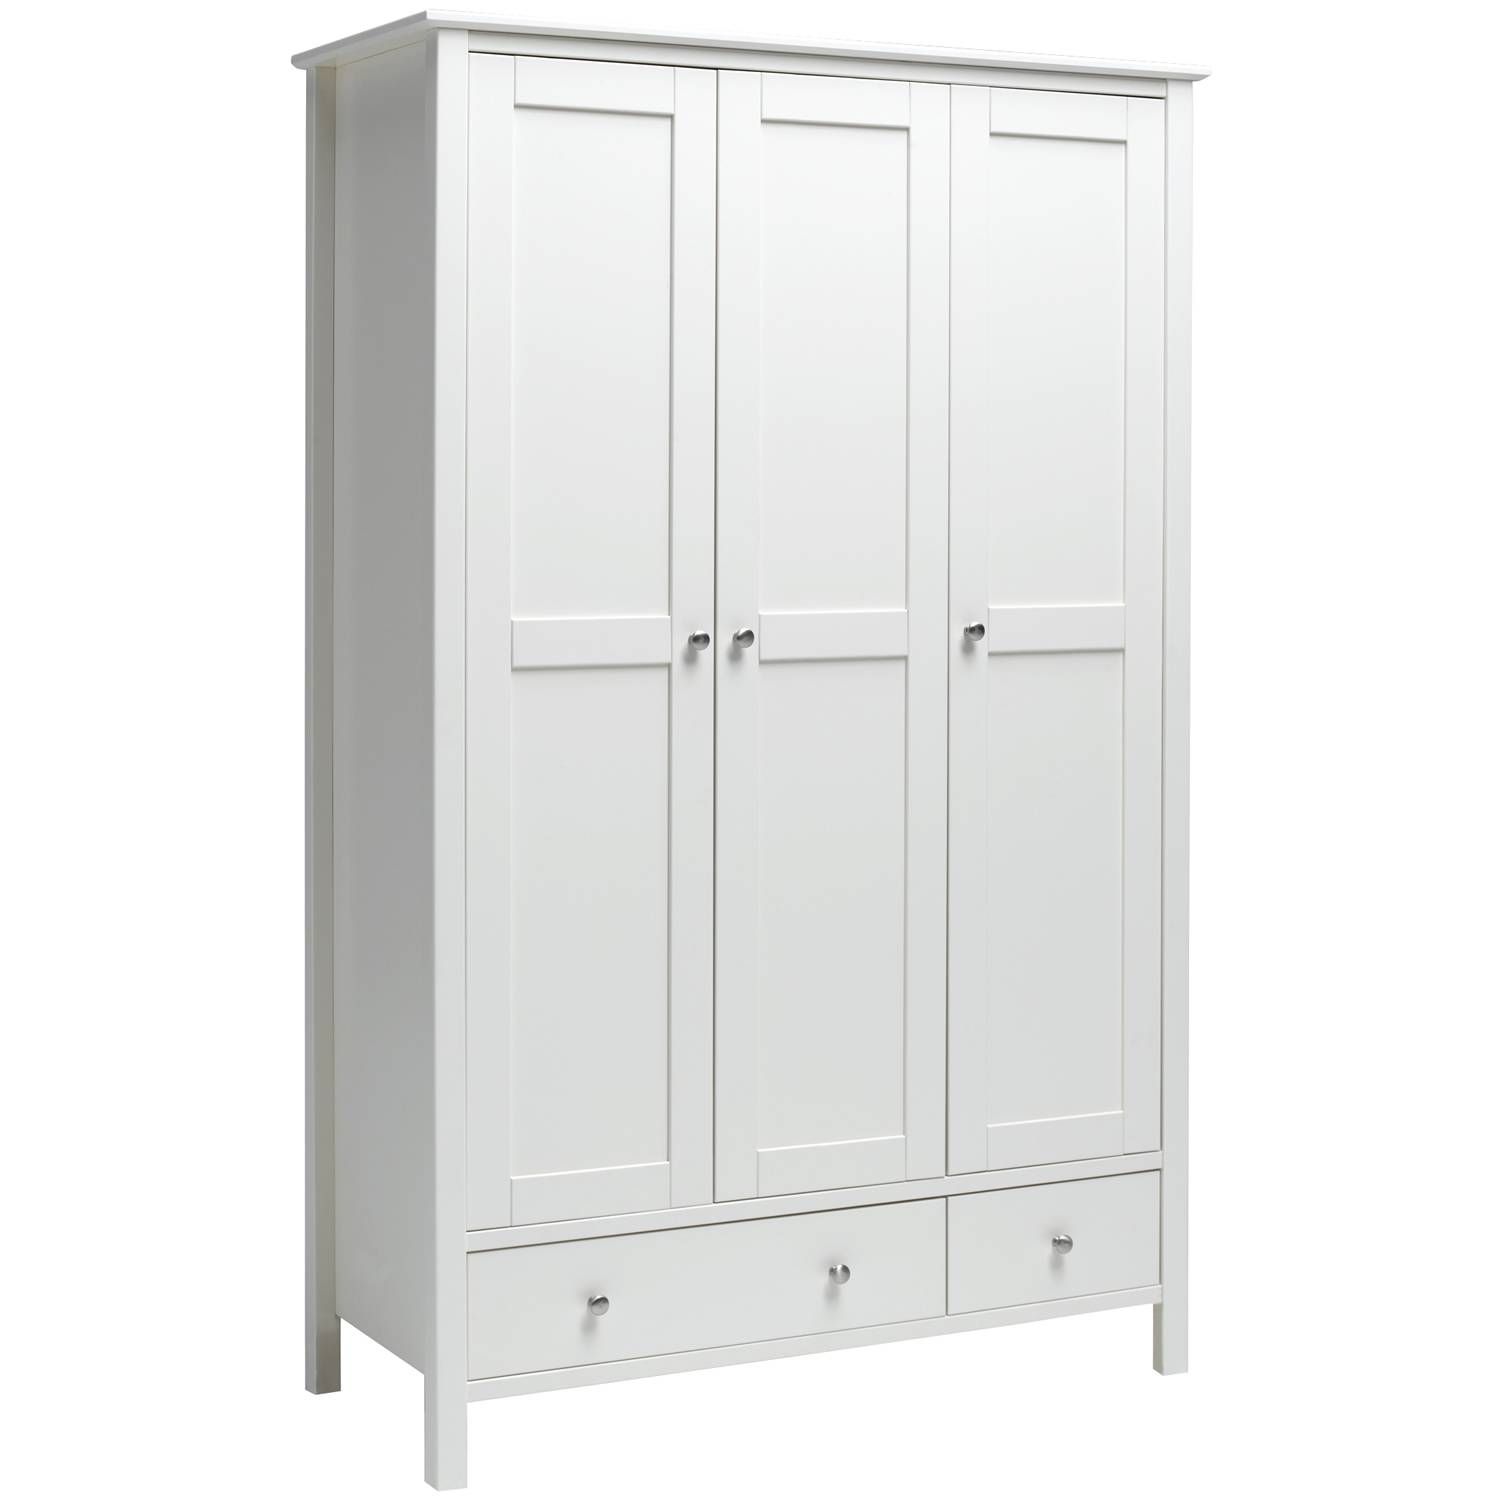 Stockholm 3 Door 2 Drawer Wardrobe White – Simply Furniture Intended For White Three Door Wardrobes (View 2 of 15)